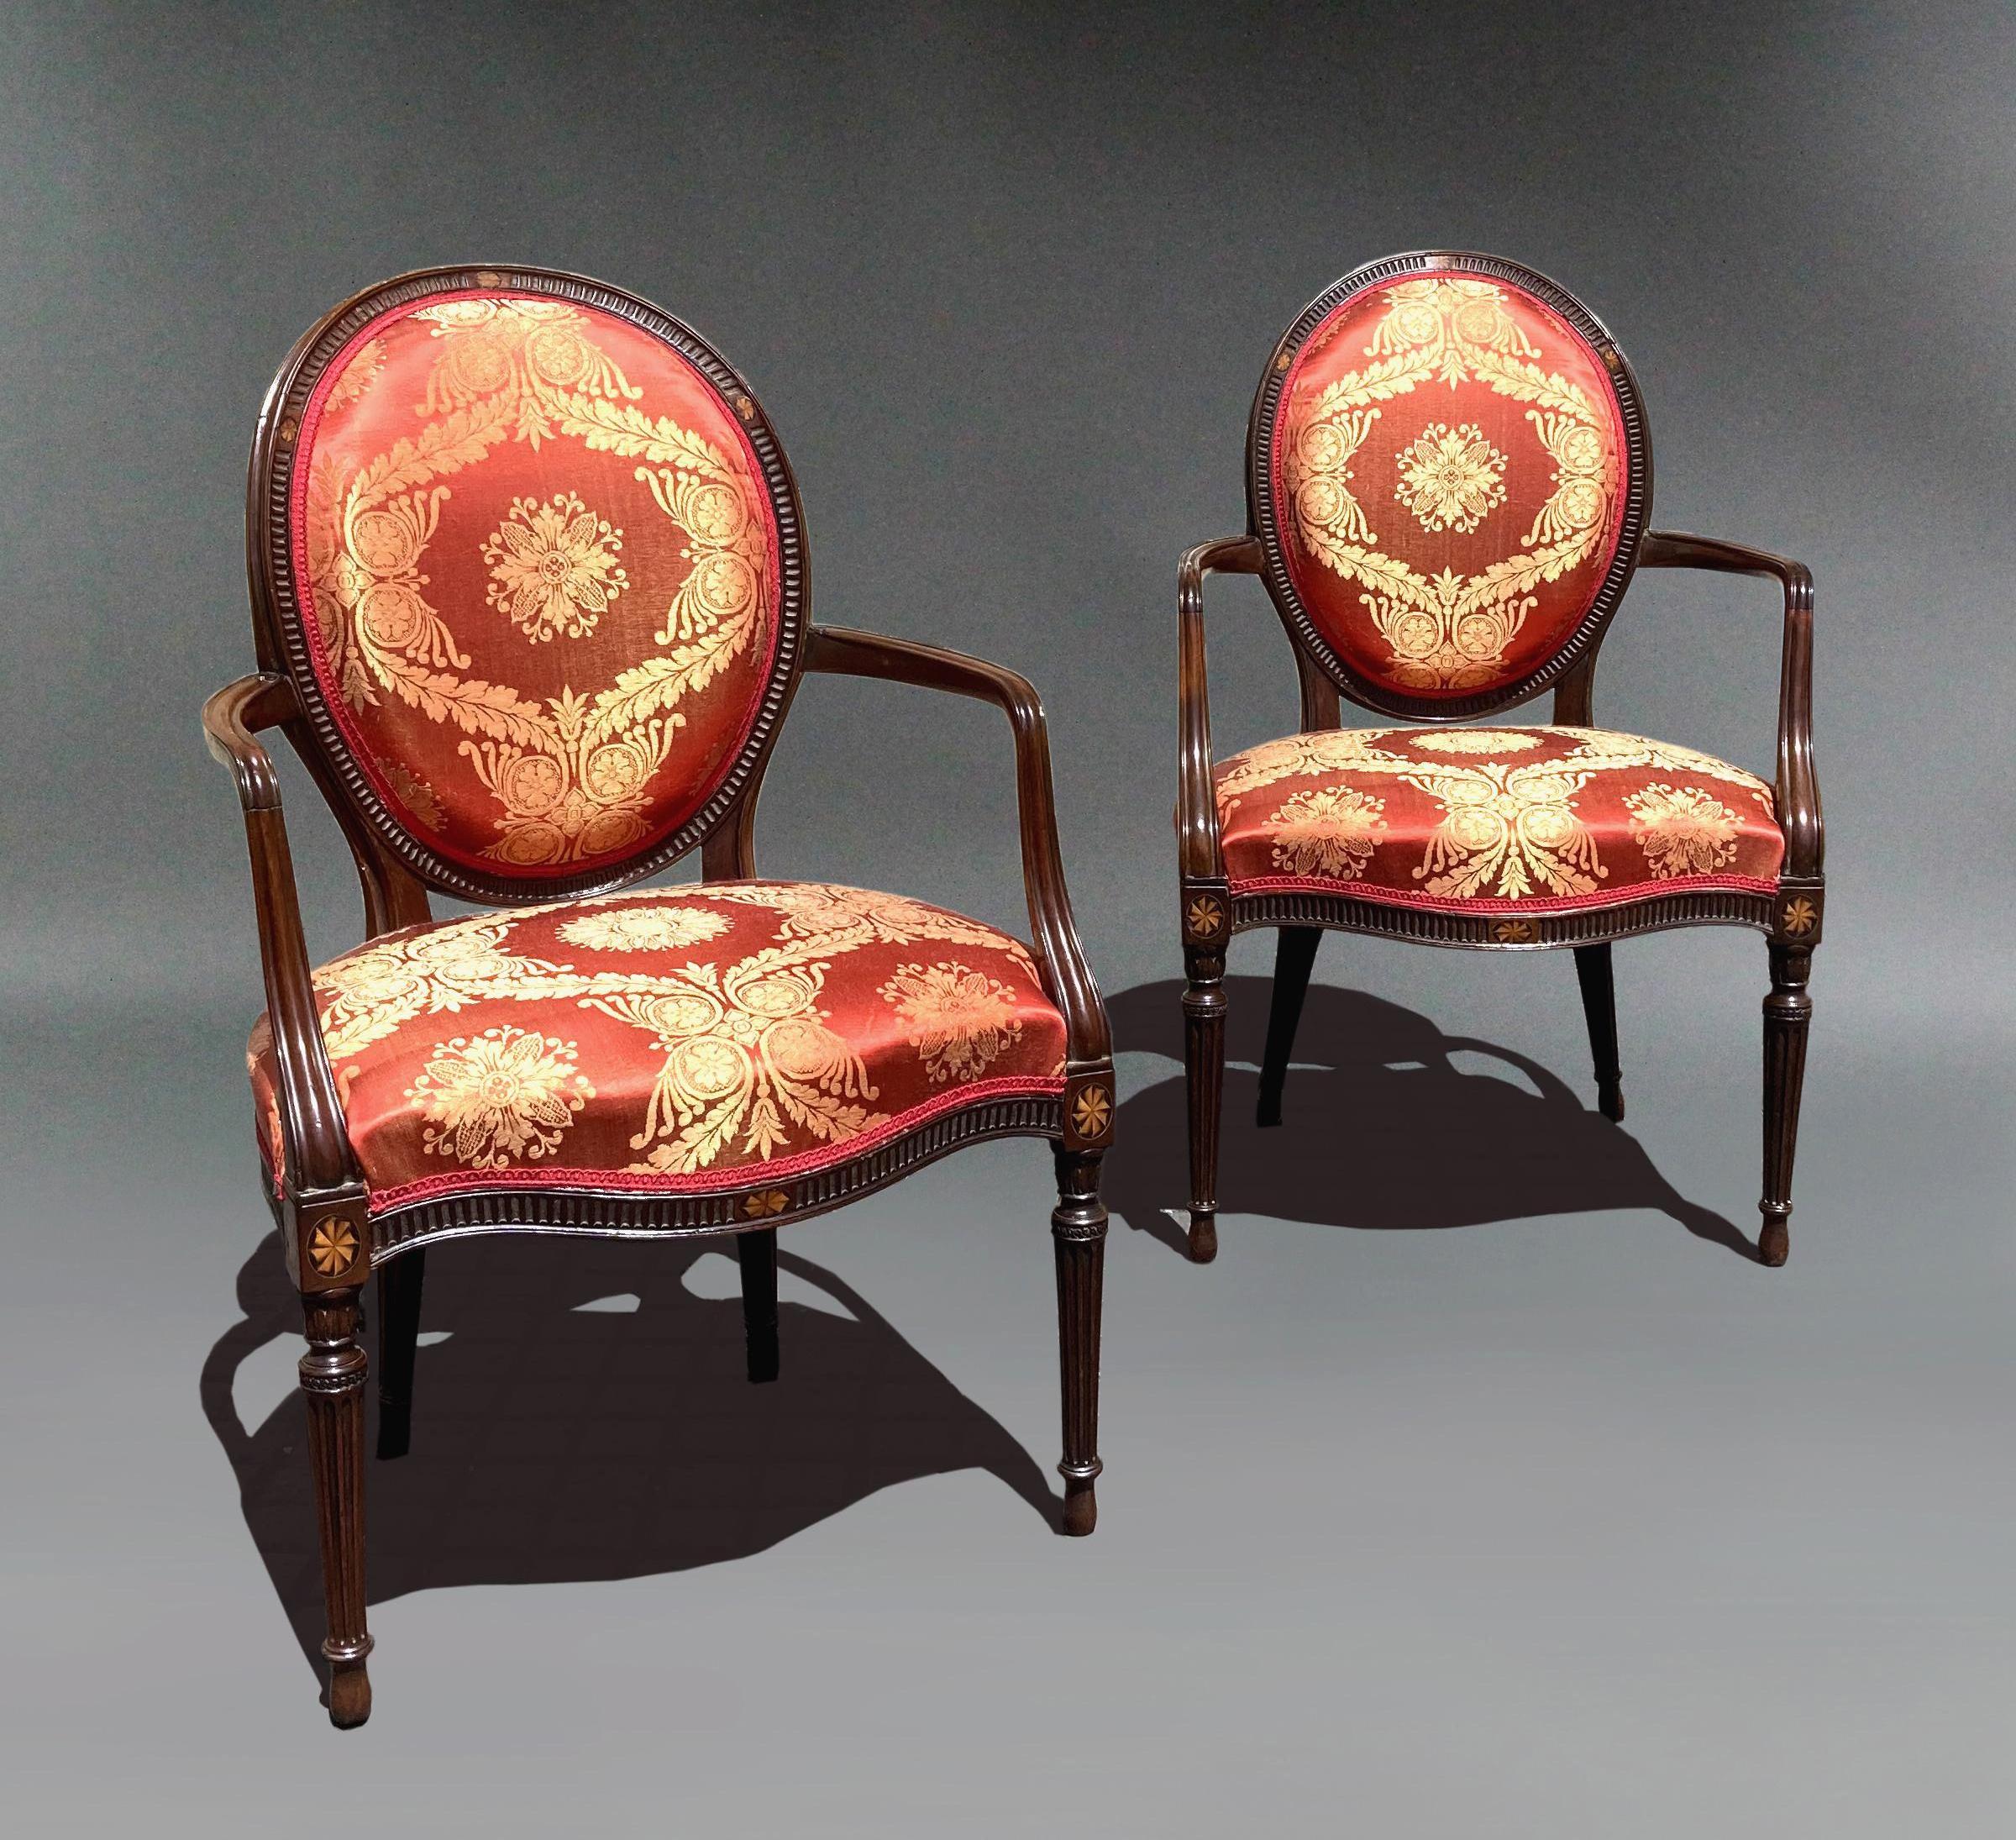 Pair of George III mahogany armchairs in red damask; manner of John Linnell.
The upholstered backs and seats are covered in red silk damask and joined by scrolled arms. The serpentine rails and oval backs with carved fluted detail and with